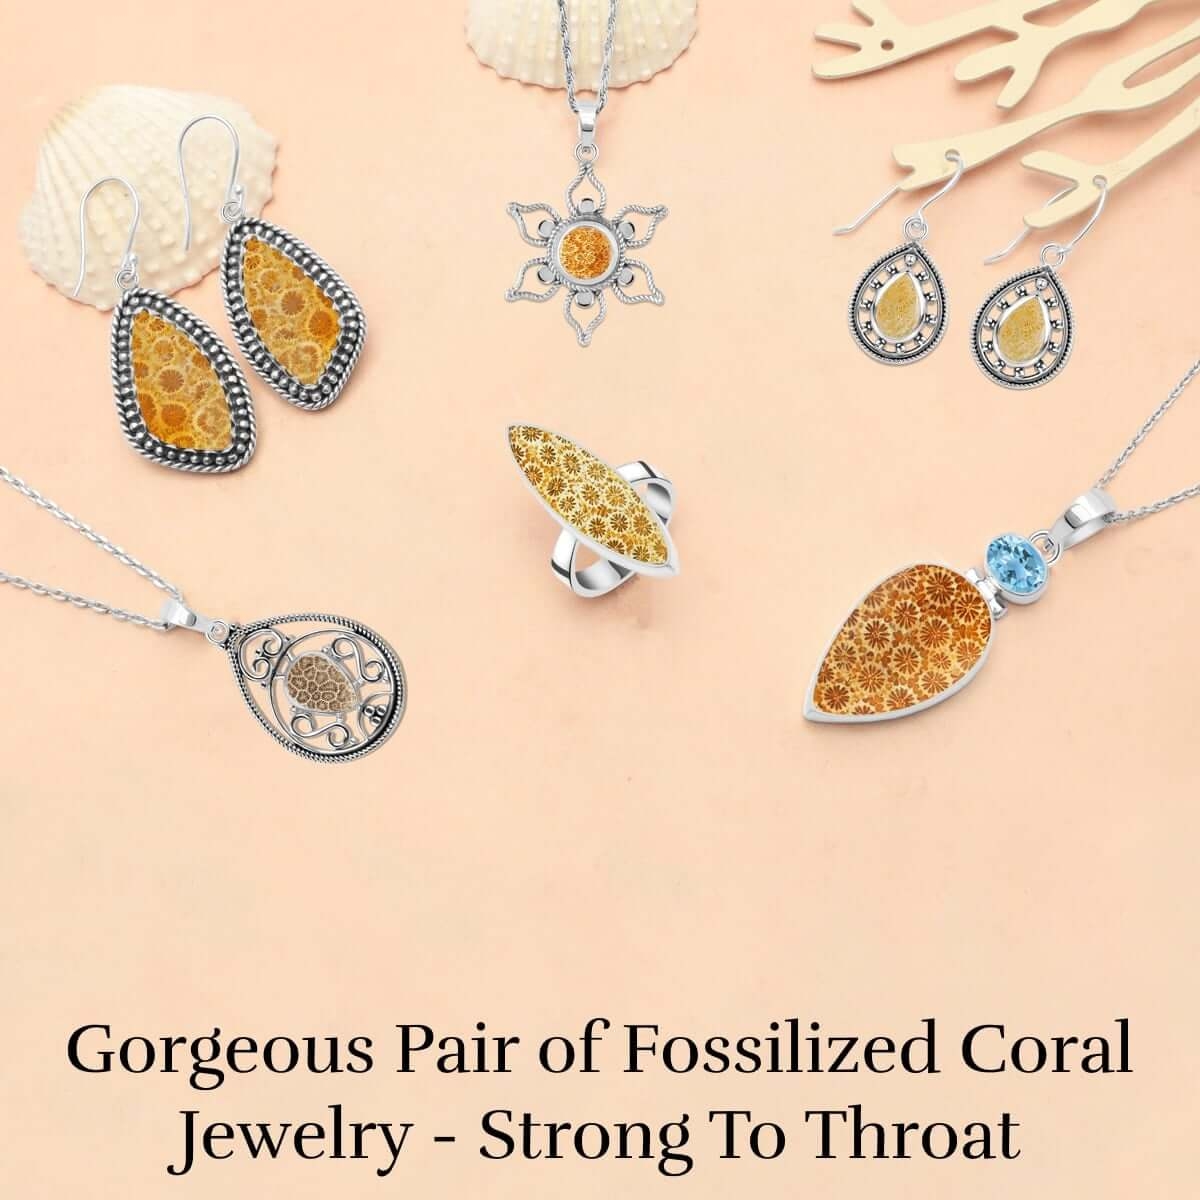 Fossilized Coral Healing Properties